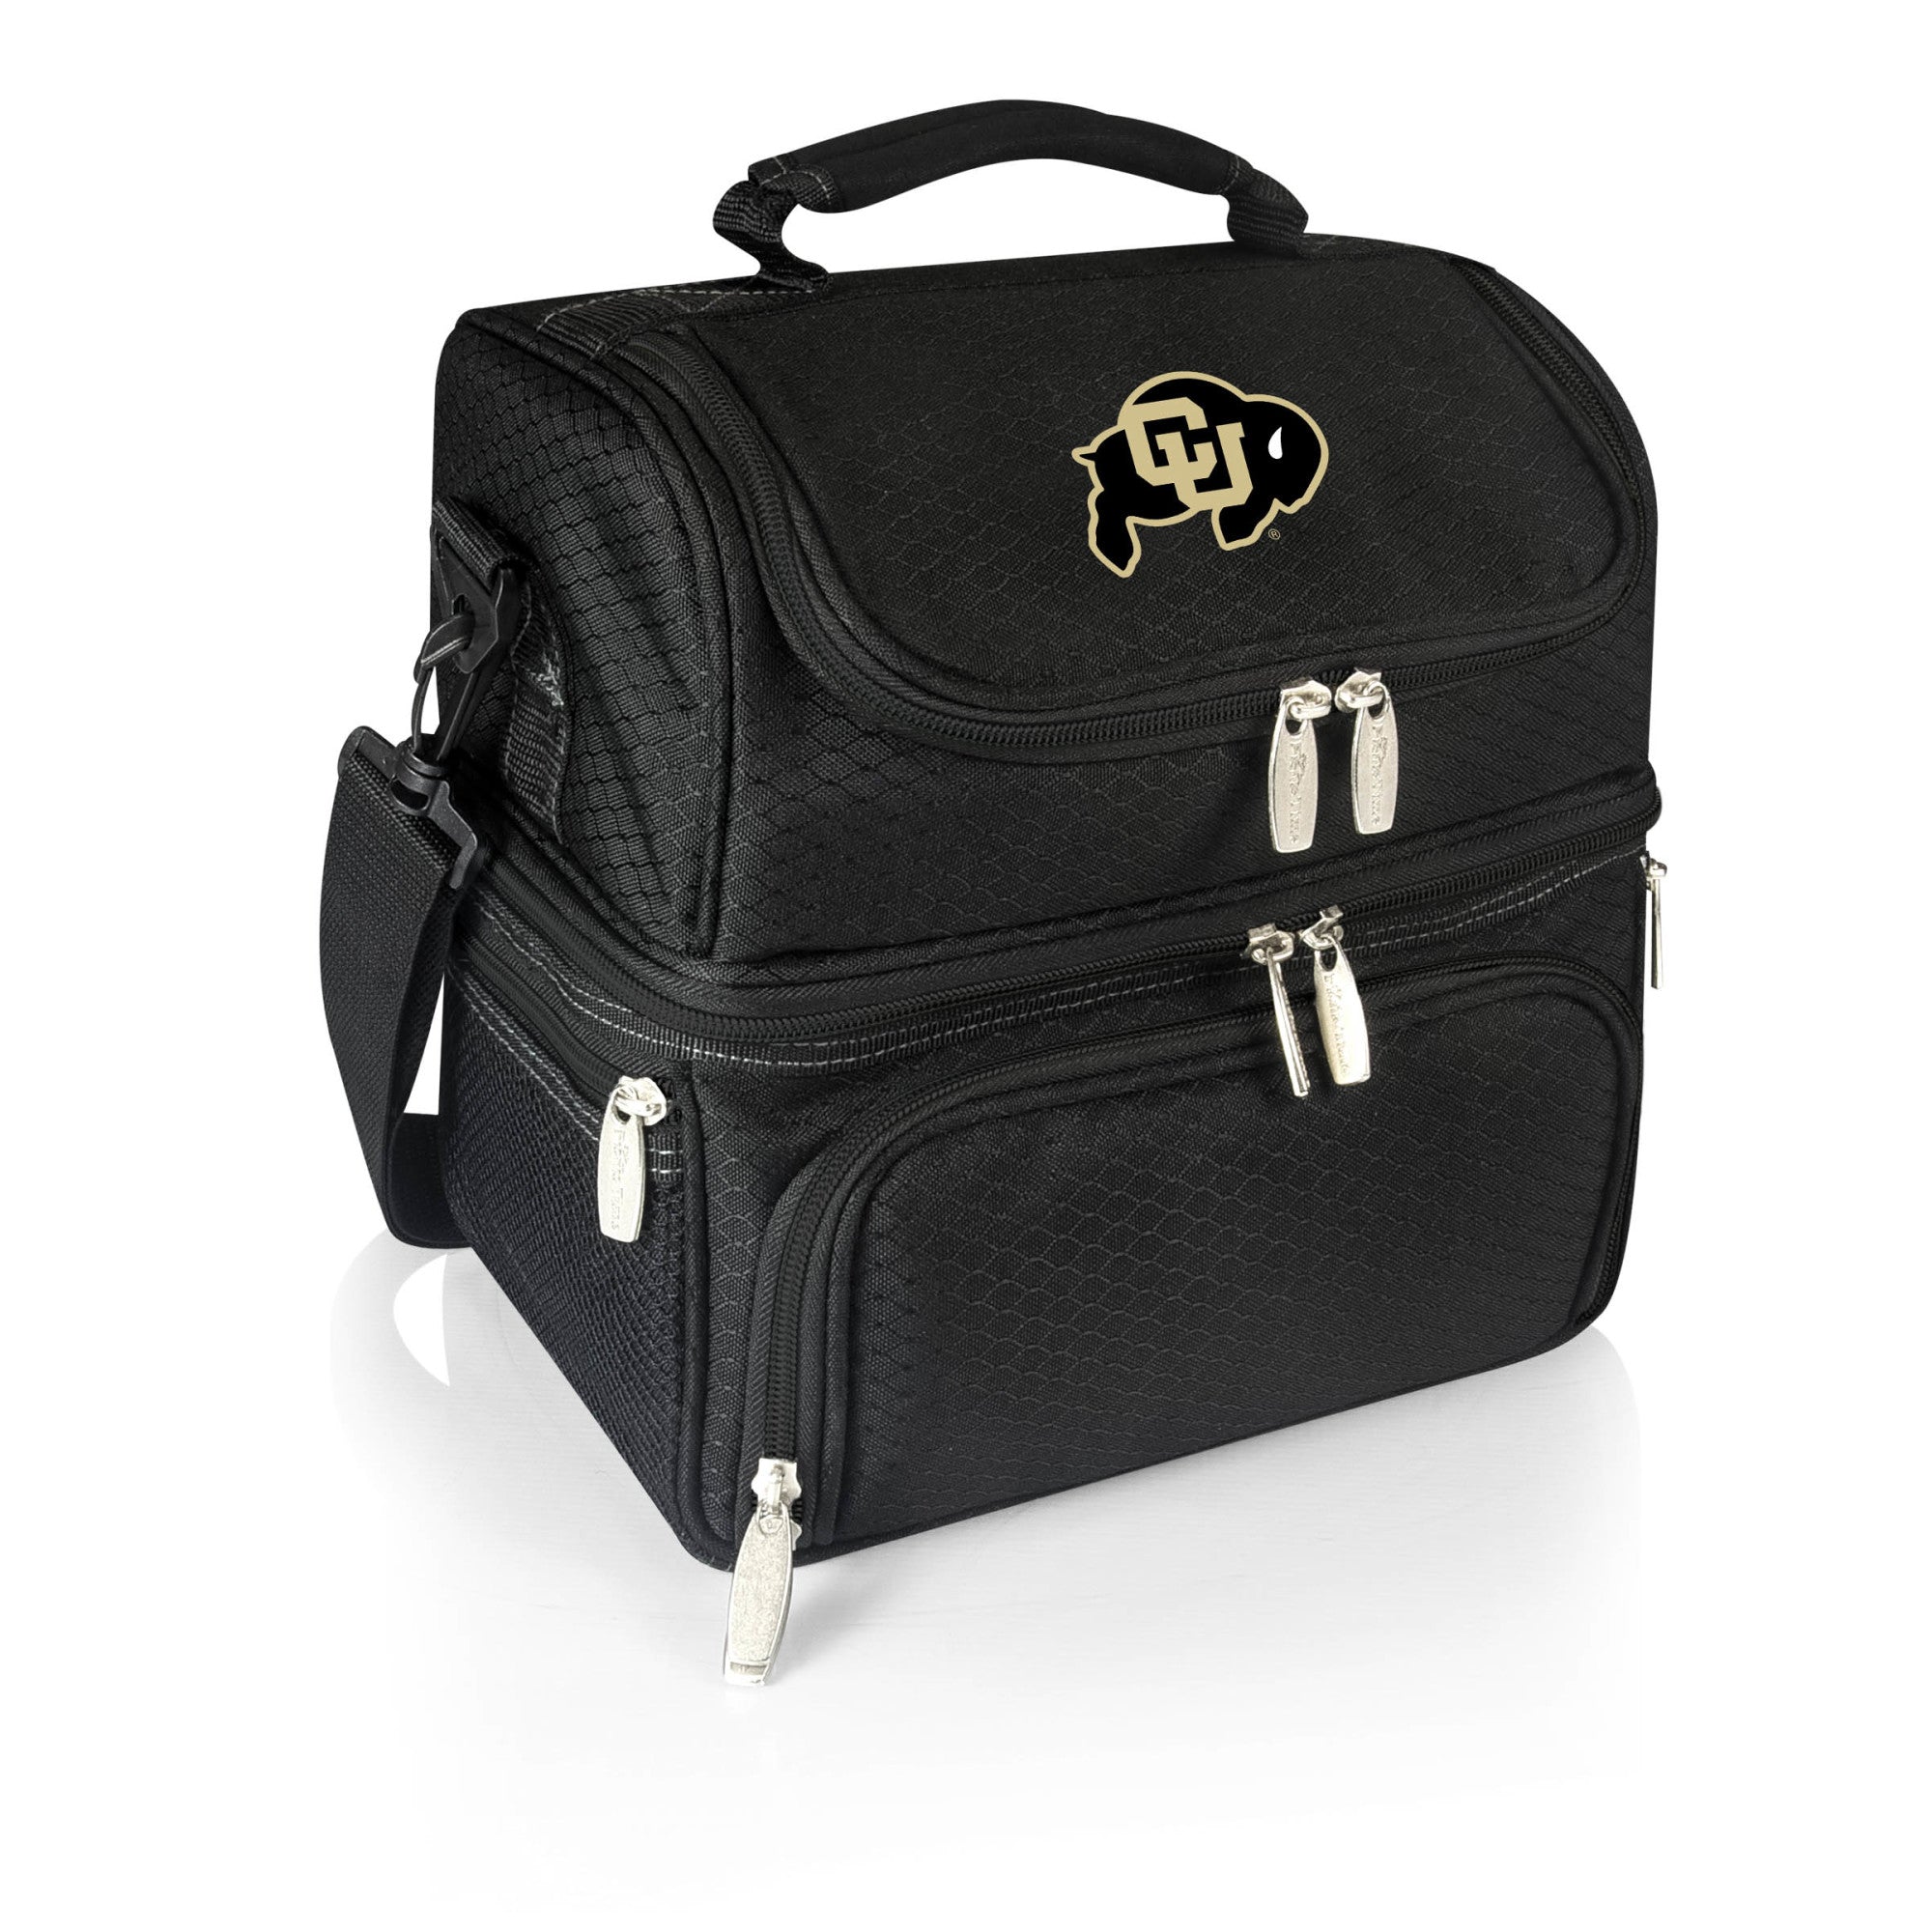 Colorado Buffaloes - Pranzo Lunch Bag Cooler with Utensils